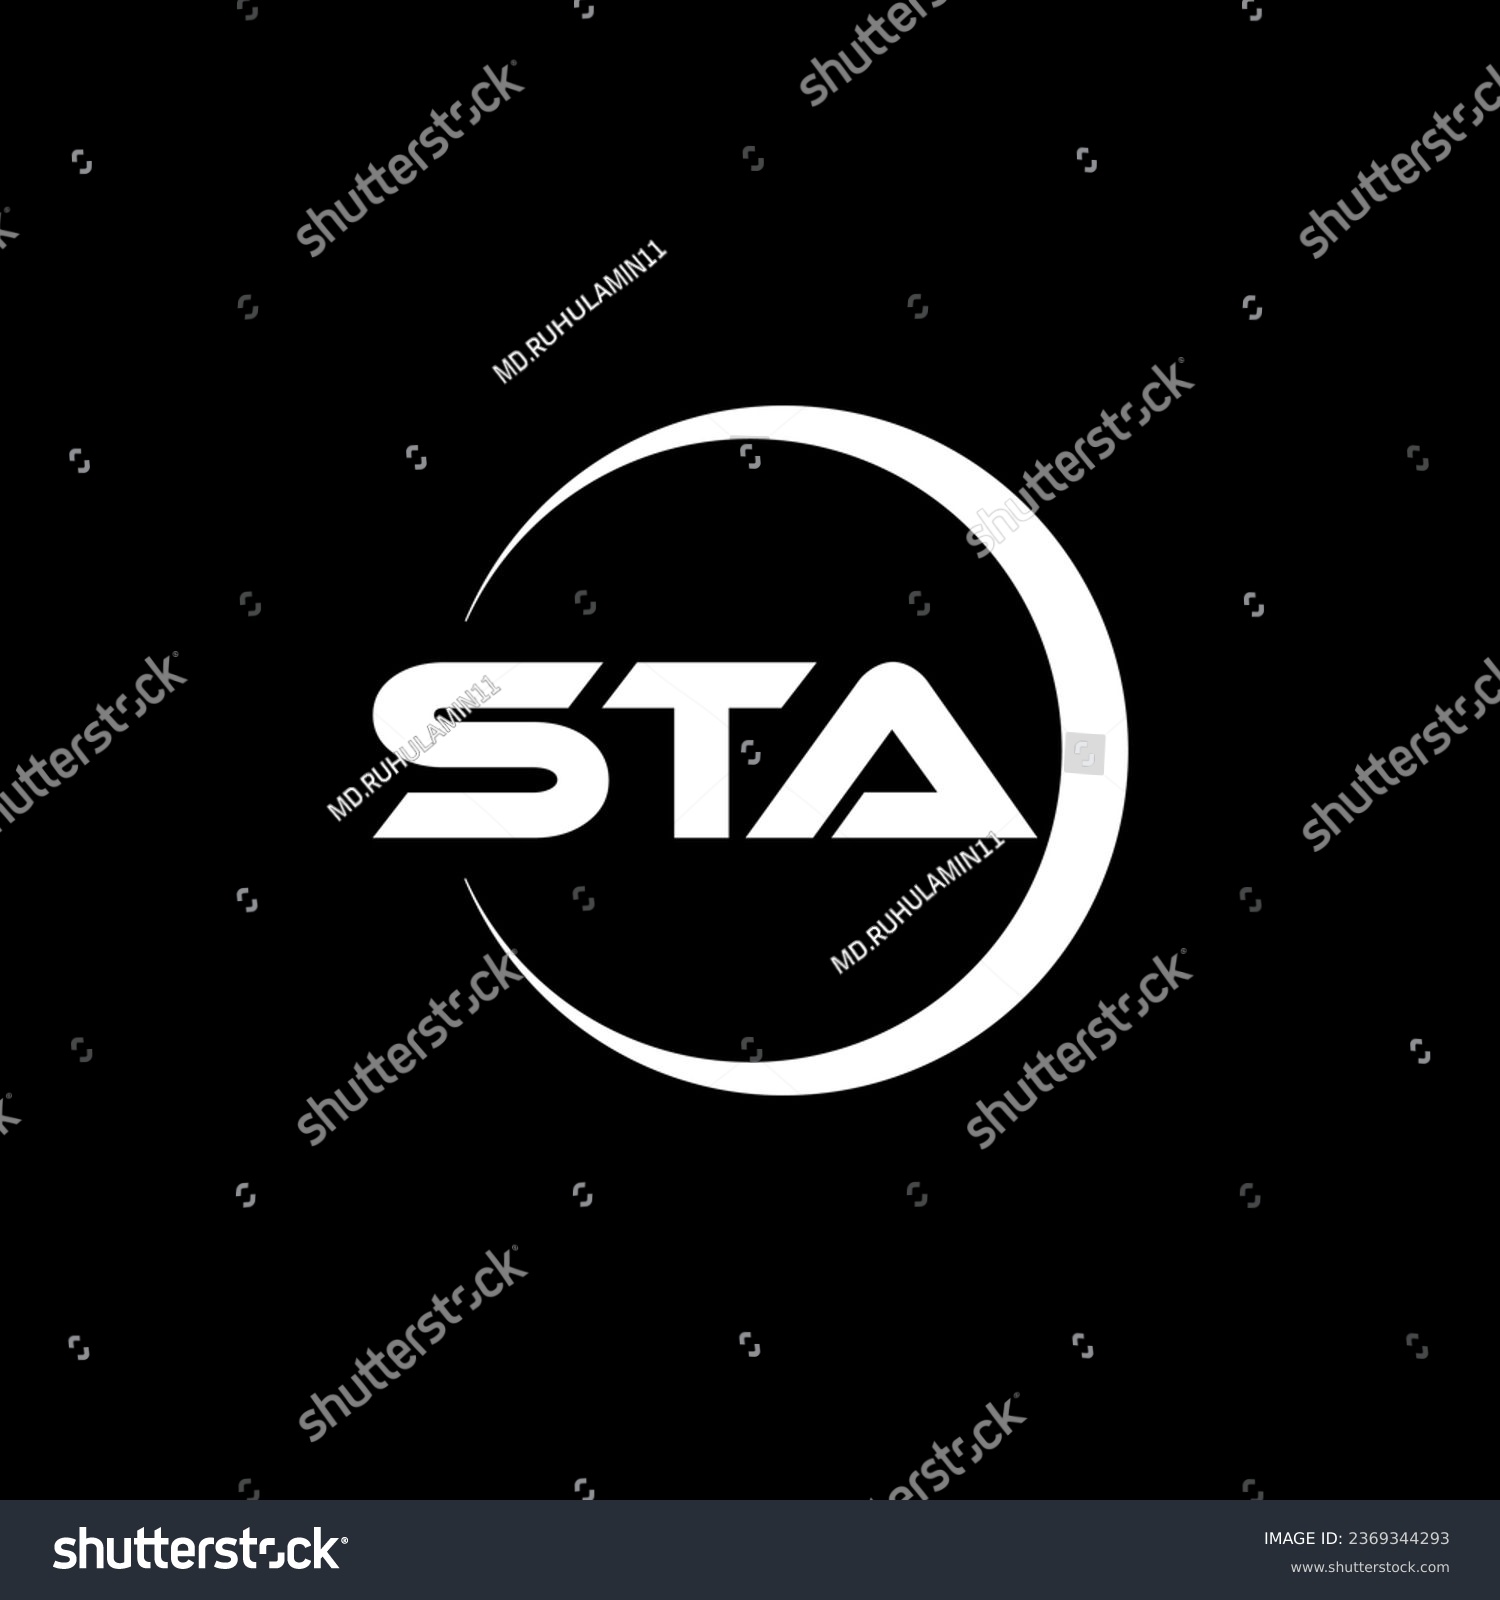 STA Letter Logo Design, Inspiration for a Unique Identity. Modern Elegance and Creative Design. Watermark Your Success with the Striking this Logo. #2369344293